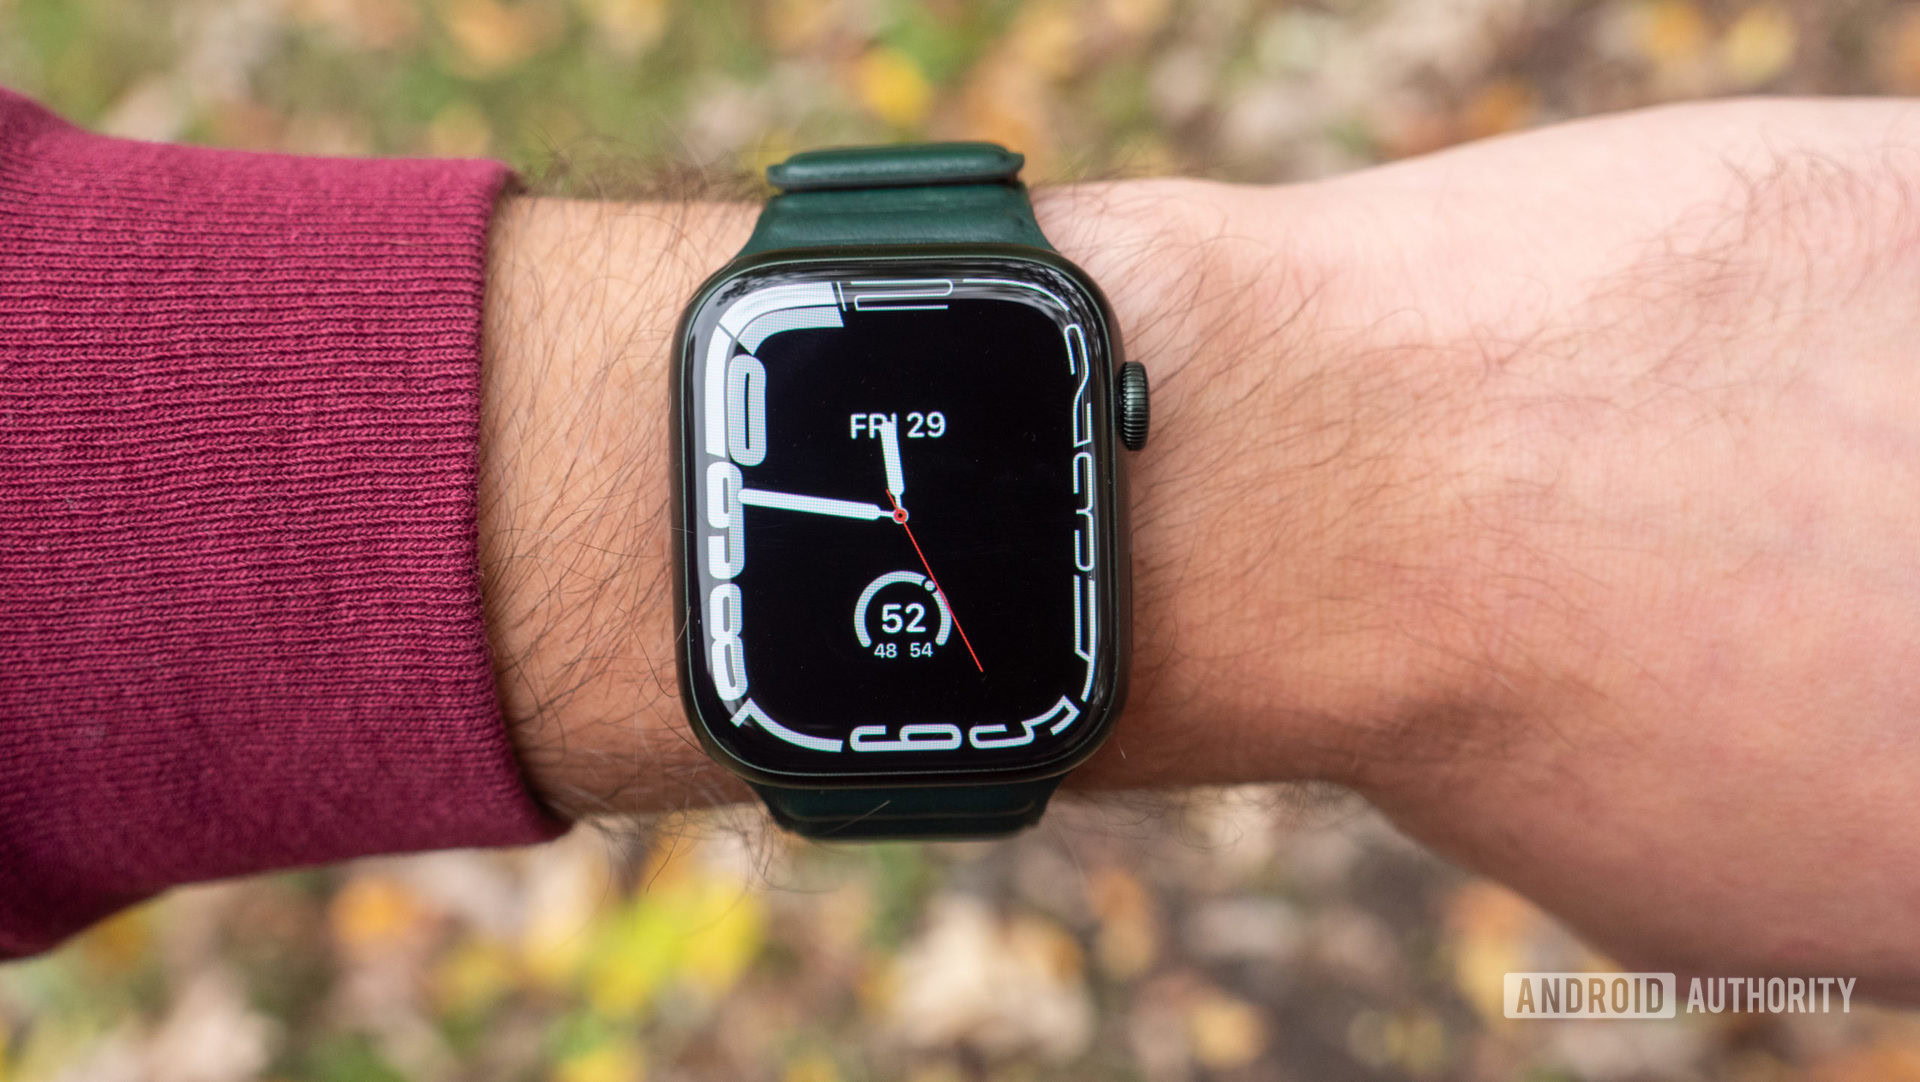 A user wears an Apple Watch Series 7 showing the Contour watch face.